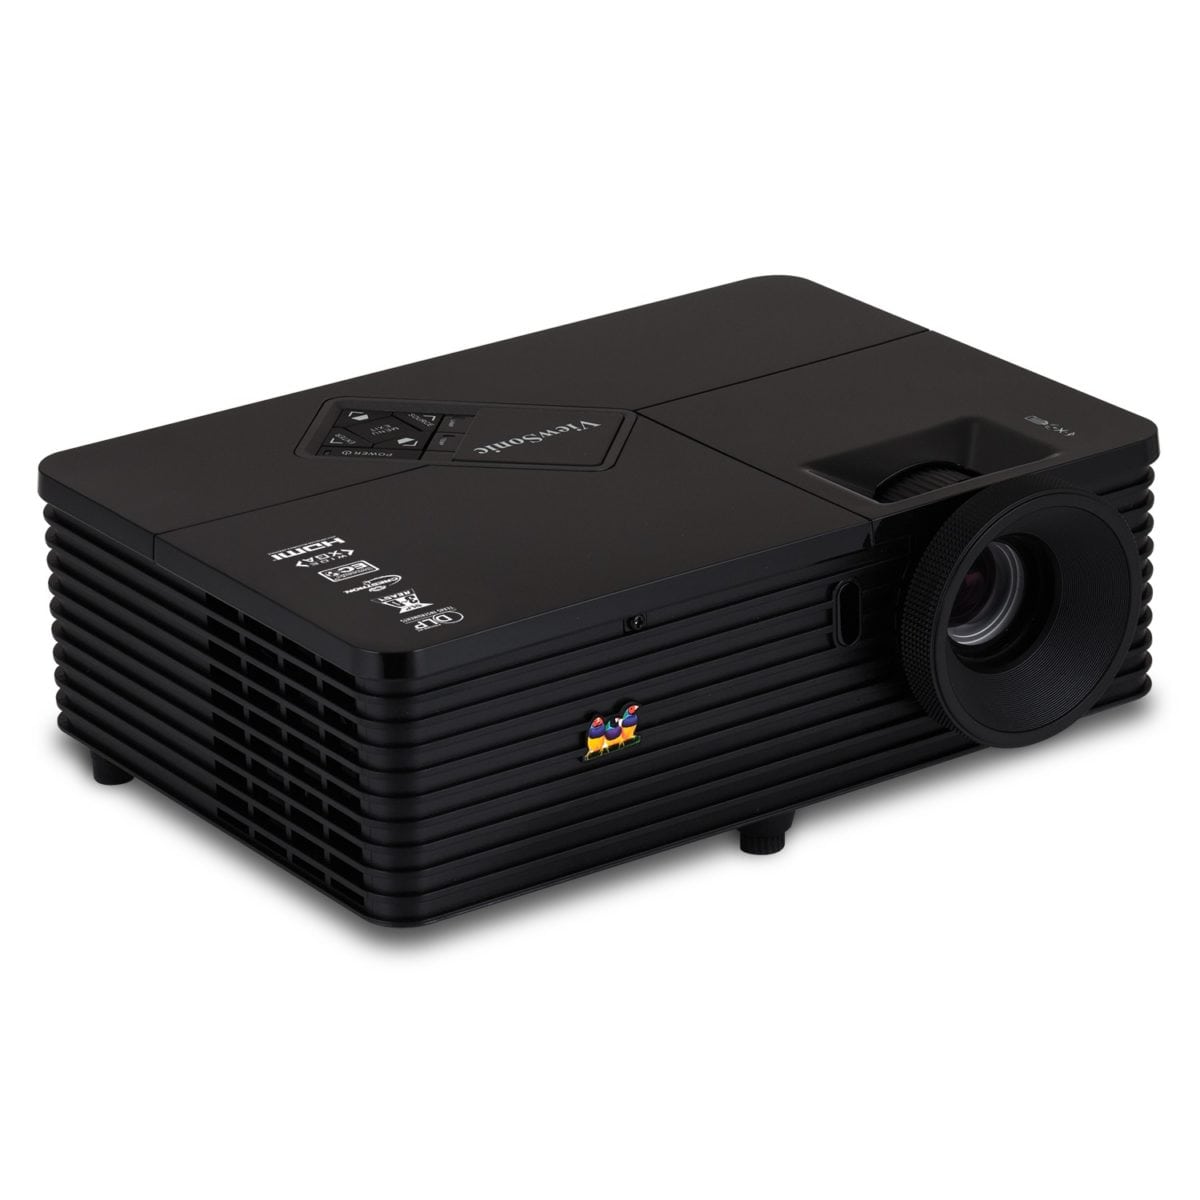 ViewSonic PJD6544w Projector Review